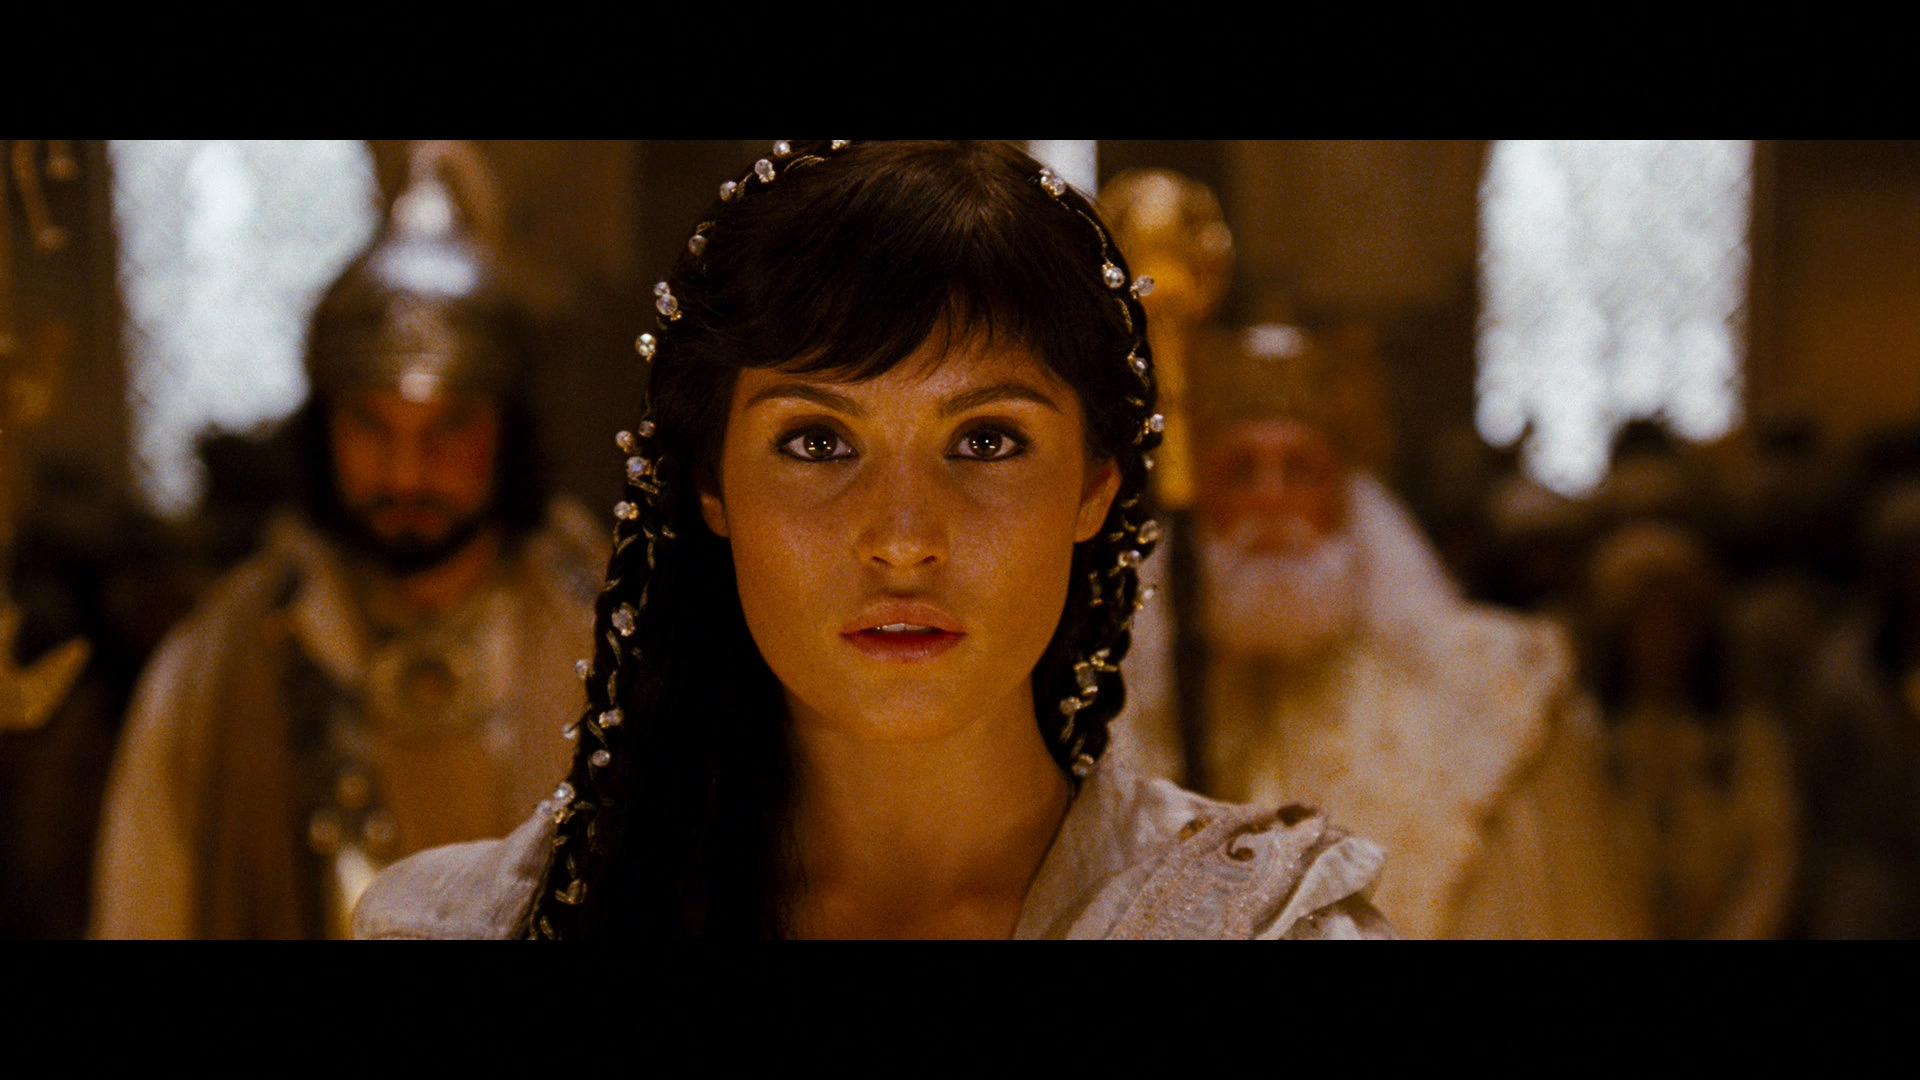 Prince Of Persia: The Sands Of Time, Movies, Gemma Arterton, Prince Of Persia Wallpaper